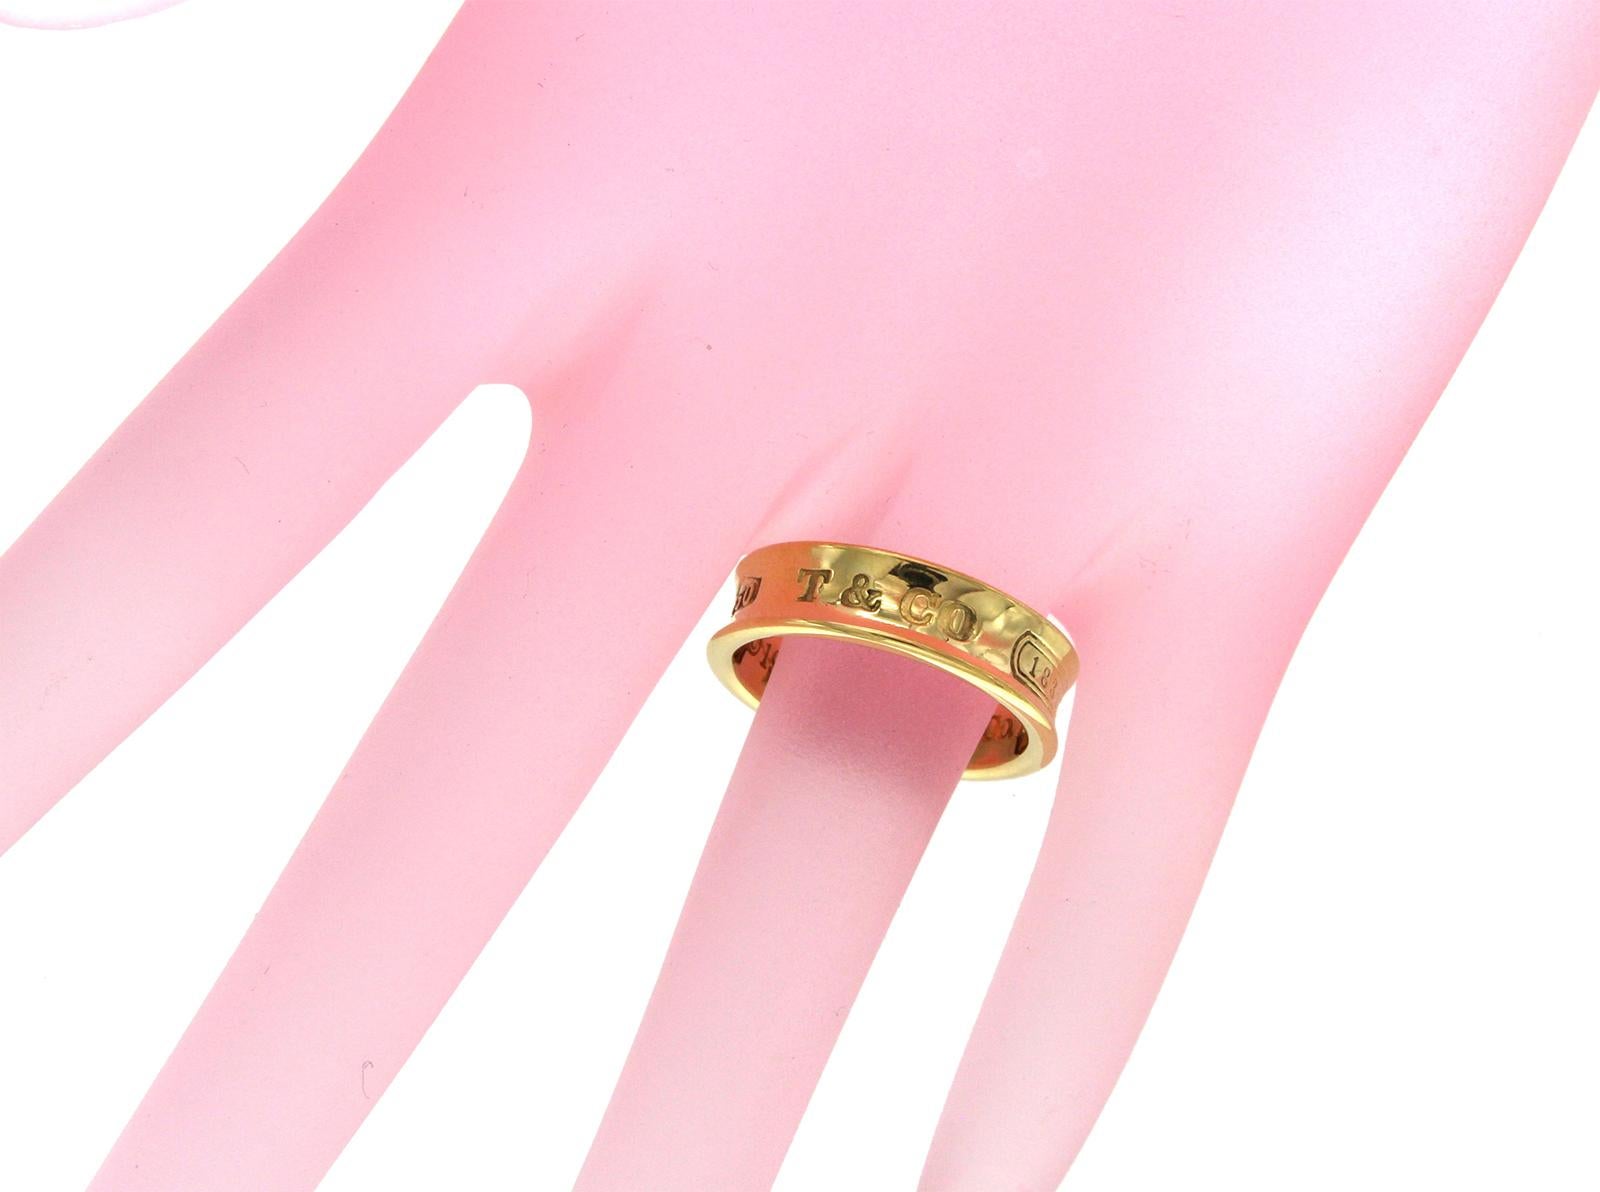 Type: Ring
Top: 6 mm
Band Width: 6 mm
Metal: Yellow Gold
Metal Purity: 750
Size:6
Hallmarks: Tiffany and Co 750
Total Weight: 6.8 Grams
Stone Type: None
Condition: Pre Owned
Stock Number: U416